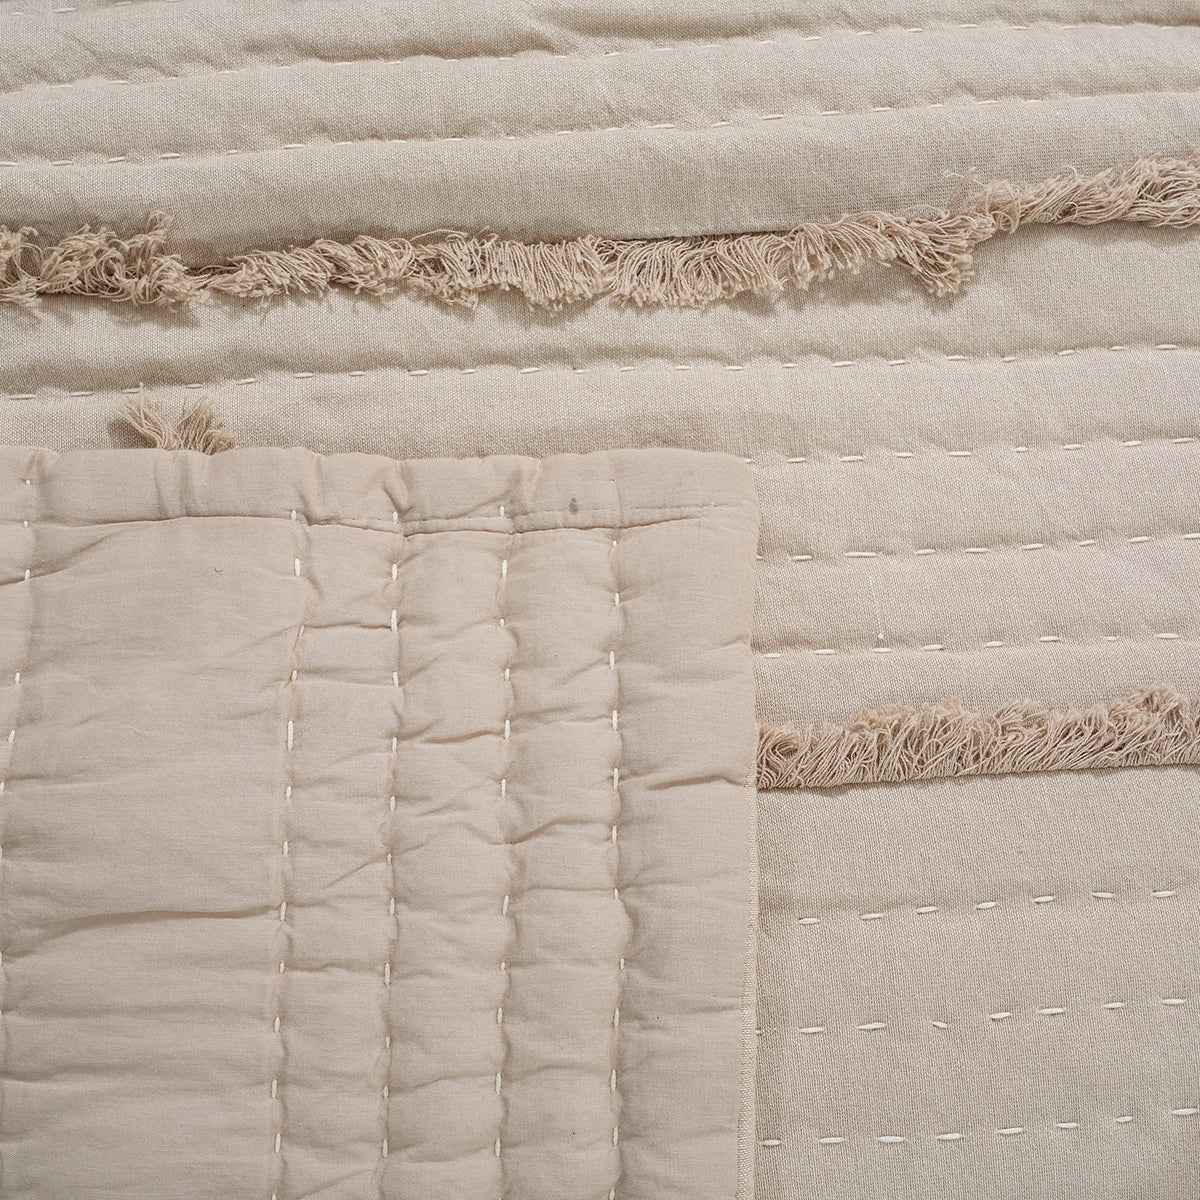 9PC Quilt/Quilted Bed Cover Set Rurban Rhupsodic Freyed Path Neutral